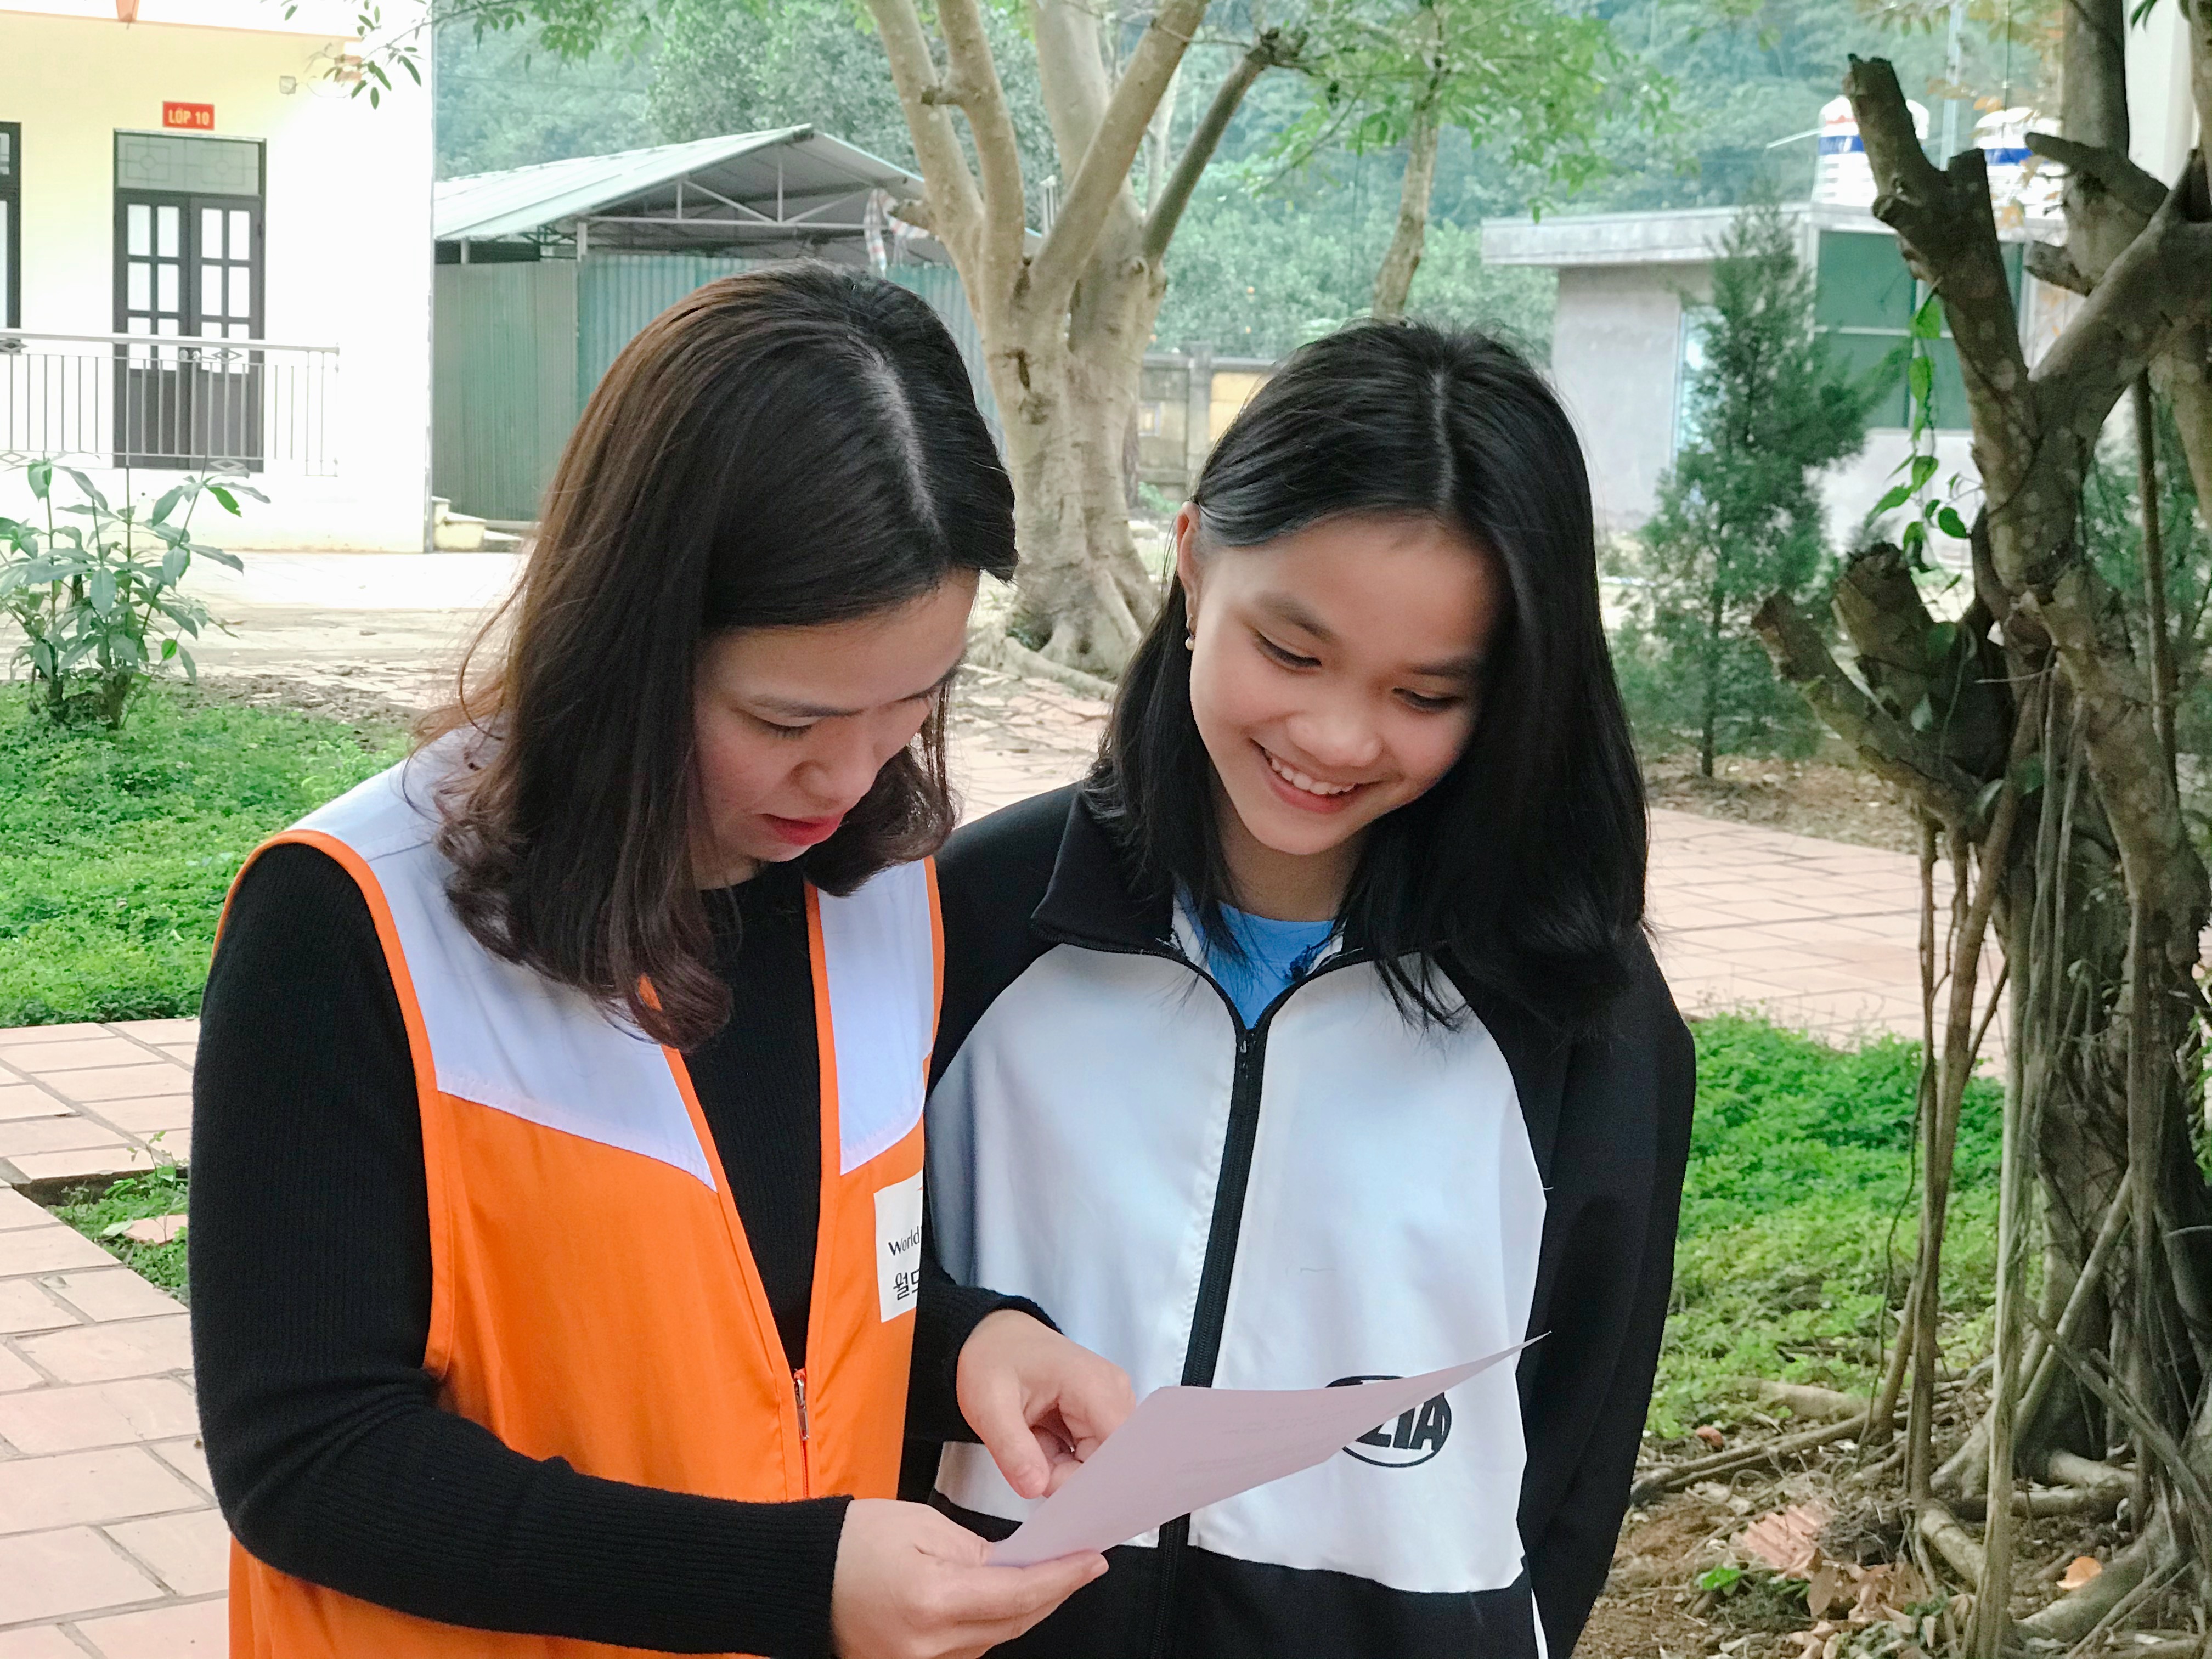 School girl from Vietnam reading her sponsor's letter with a World Vision representative.